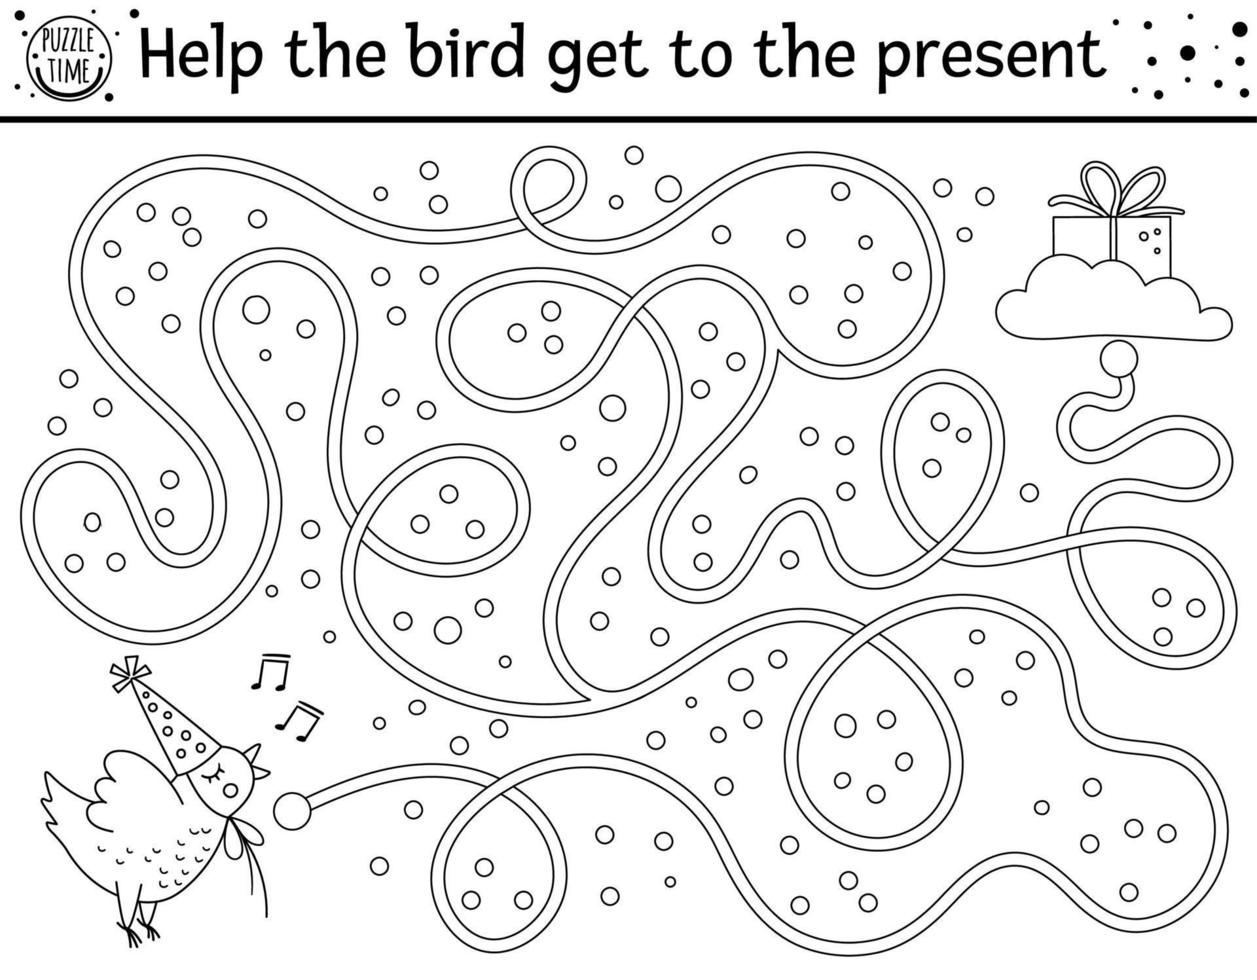 Birthday black and white maze for children. Holiday outline preschool printable educational activity. Funny line b-day party game or puzzle with cute chicken. Help the bird get to the present vector